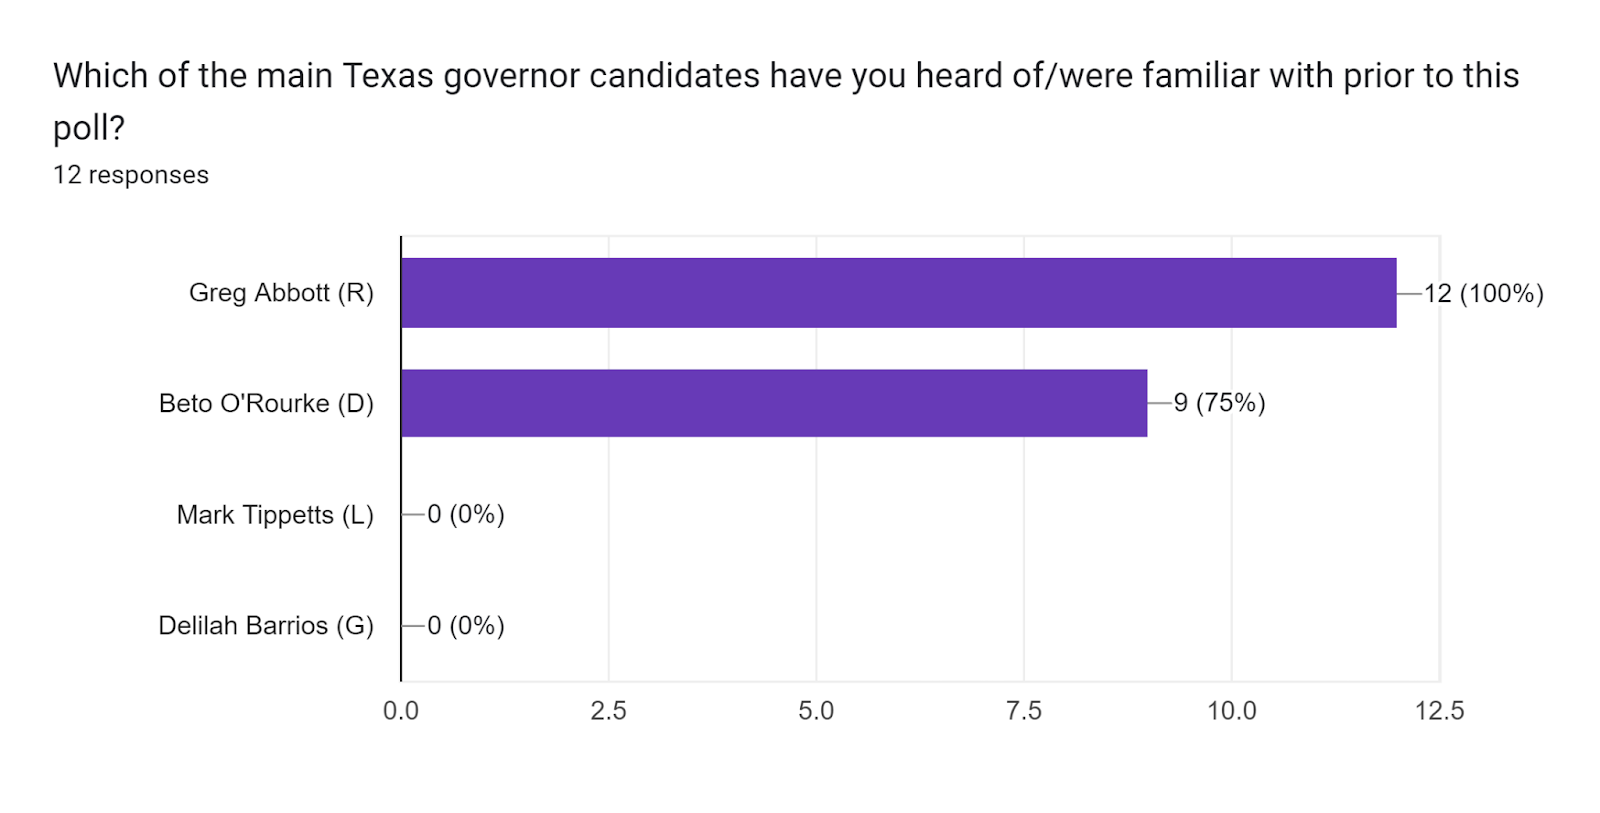 Forms response chart. Question title: Which of the main Texas governor candidates have you heard of/were familiar with prior to this poll?. Number of responses: 12 responses.